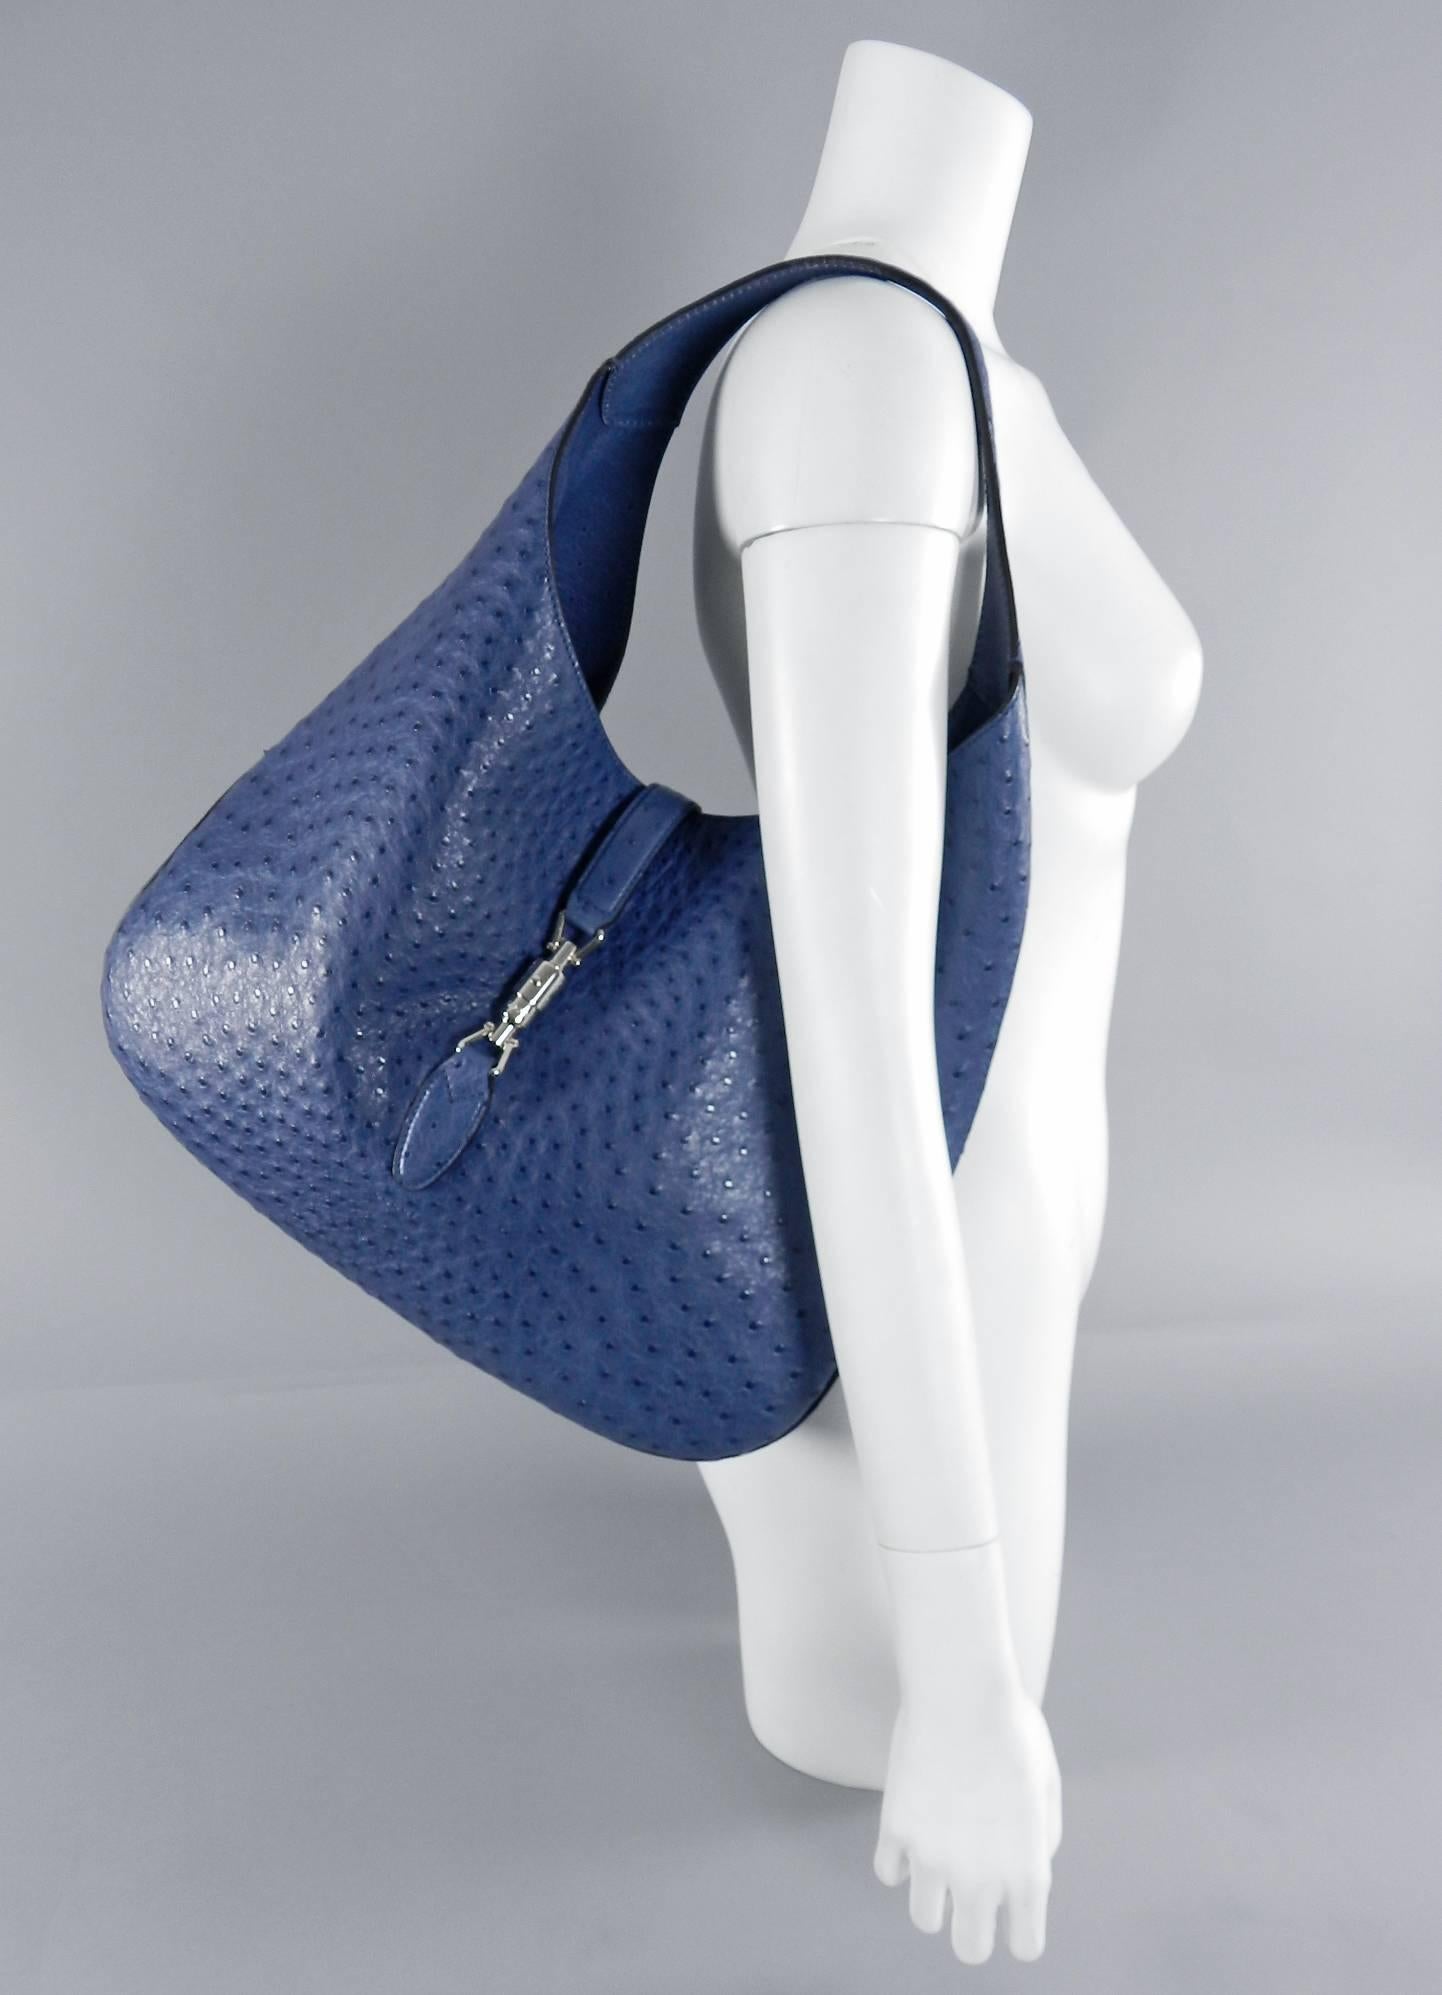 Gucci blue ostrich Jackie O bag - limited edition. Large size. Silver-tone piston closure, suede lined, small zippered pouch. Excellent pre-owned condition - used once. Includes duster, price tag, papers. Original retail price $10,975+. Body of bag